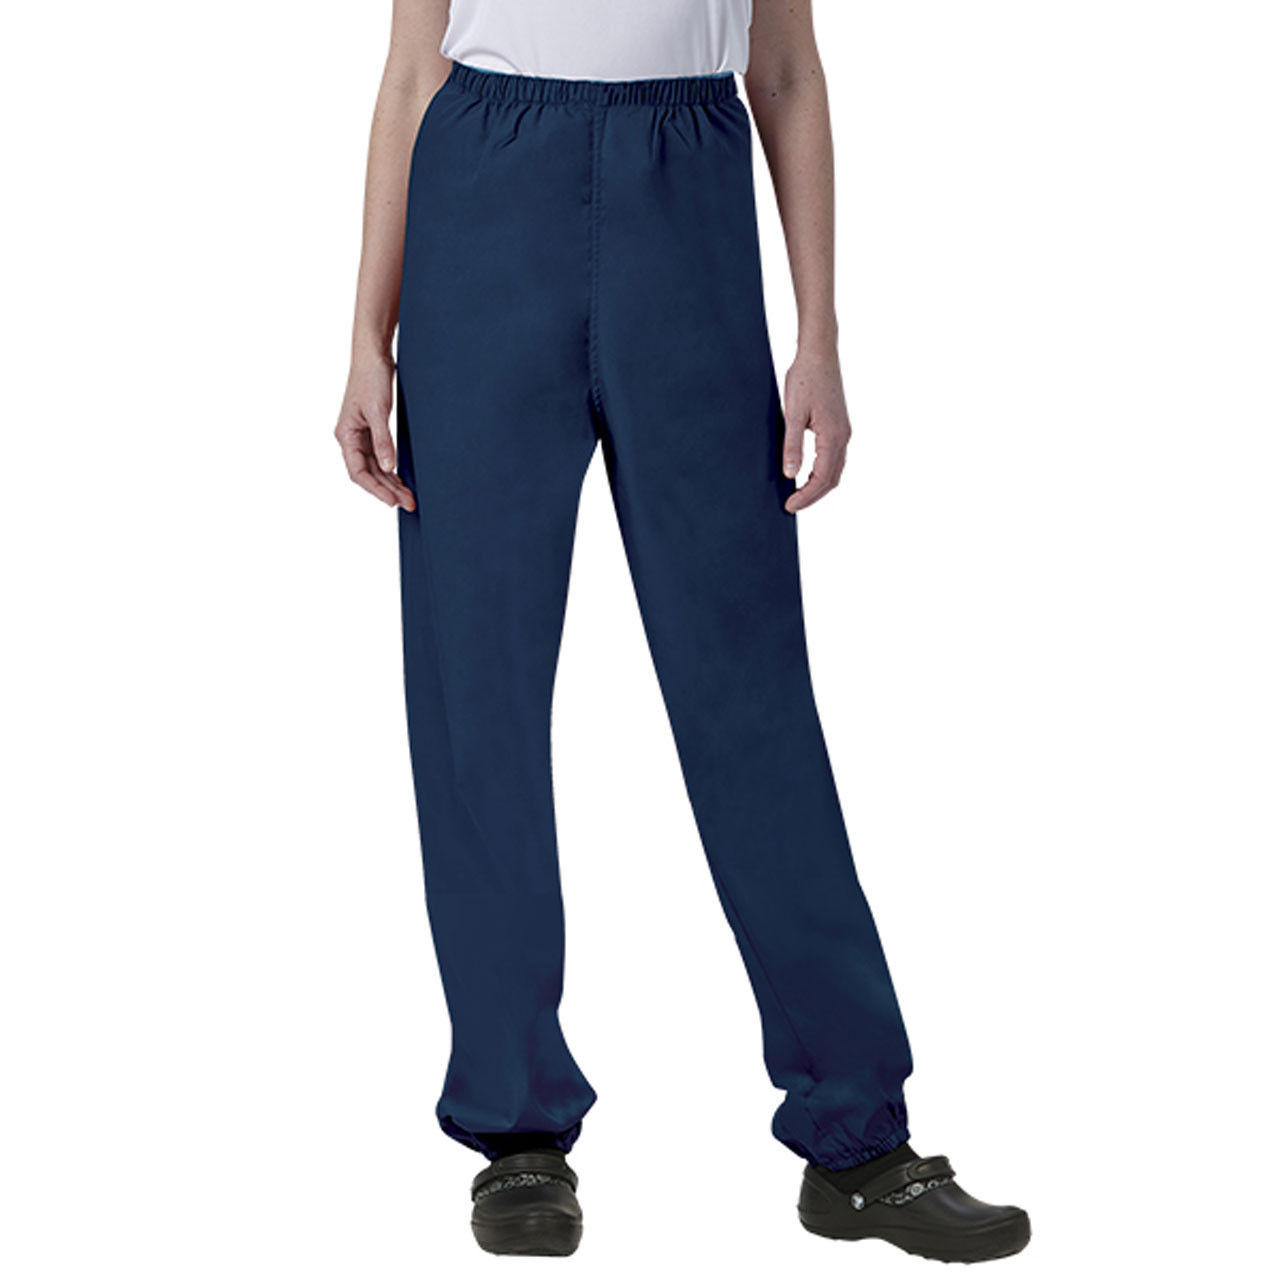 Do these bulk scrub pants come with a drawcord?